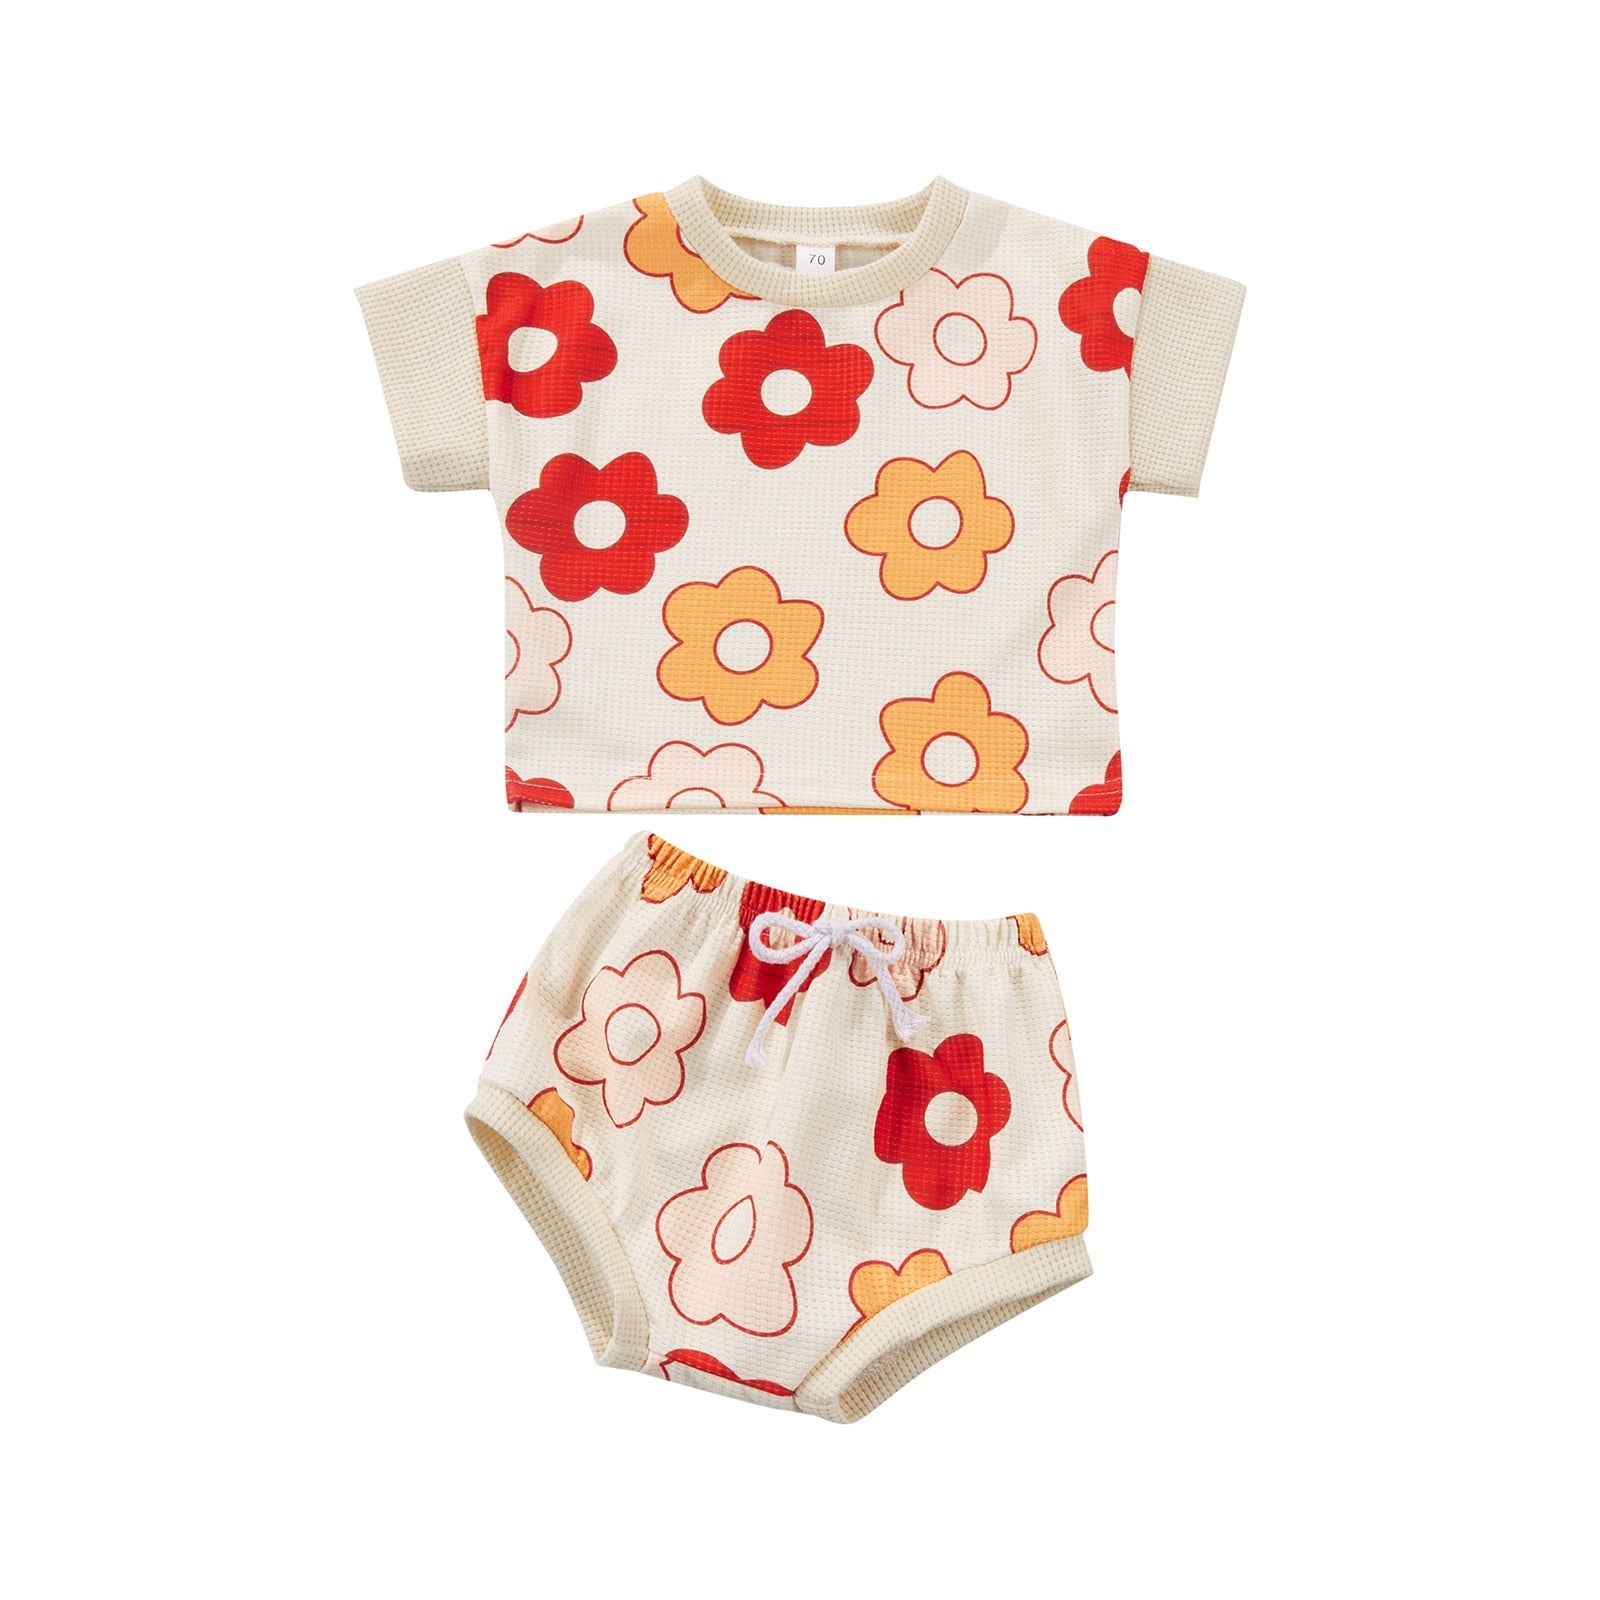 Bold Floral Baby Girl's Tee and Shorts Set - Sizes 6 Months to 4 Years - JAC